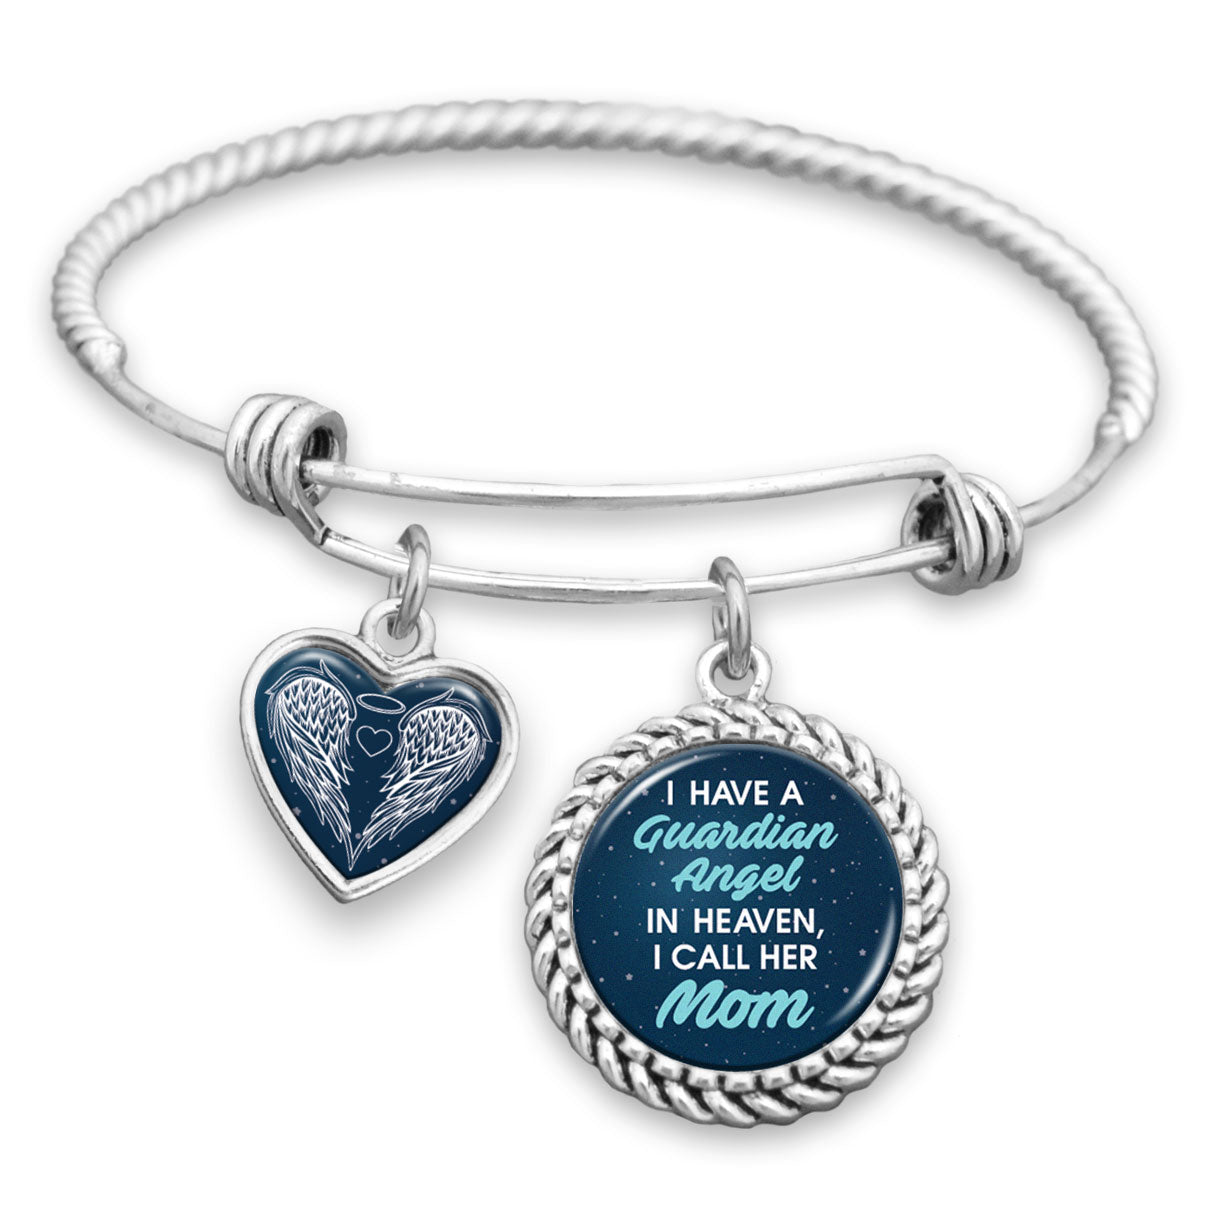 I Have A Guardian Angel In Heaven And I Call Her Mom Night Sky Charm Bracelet